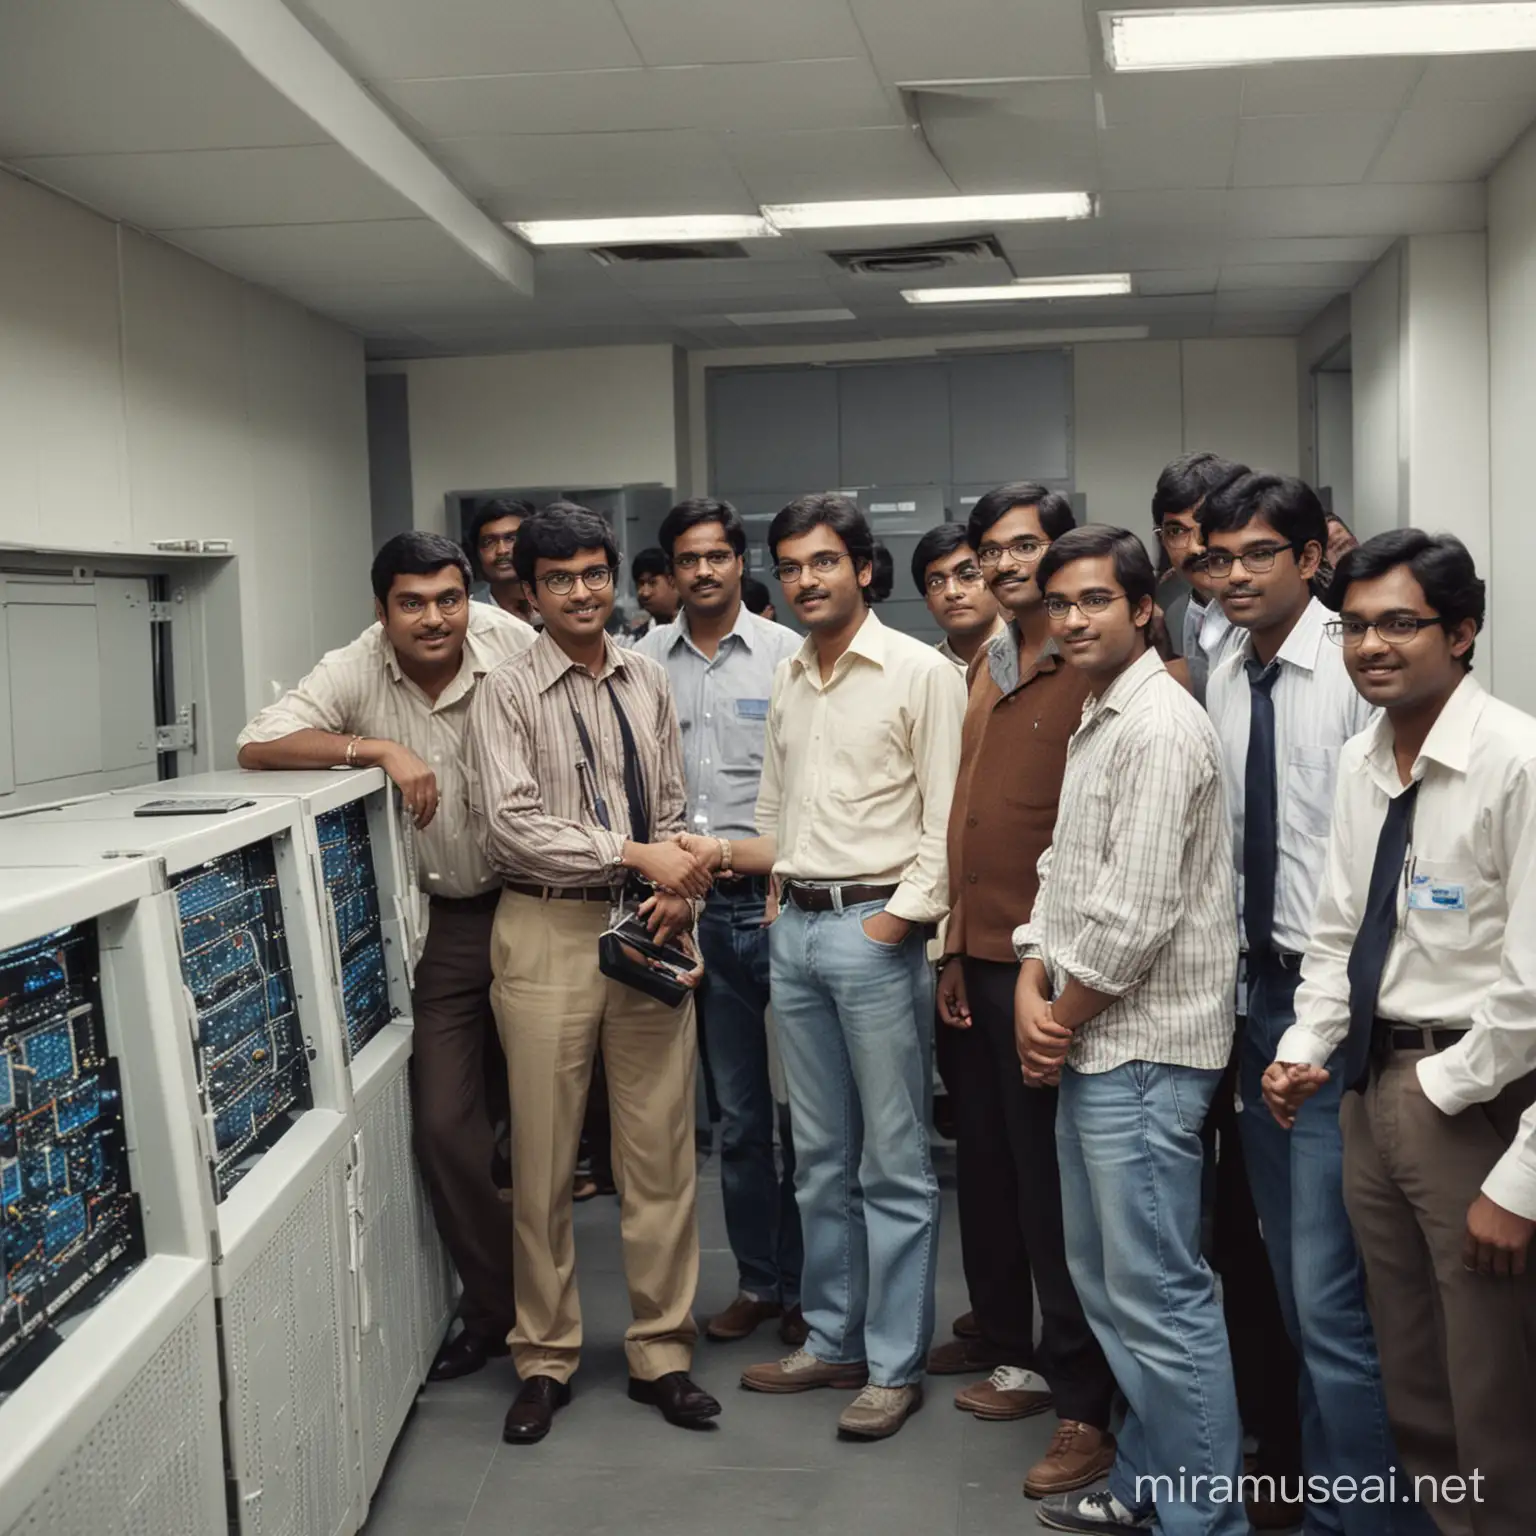 A group of computer engineering students on a visit to see India's first supercomputer CRAY in the 1980s to understand how it is used to predict weather
